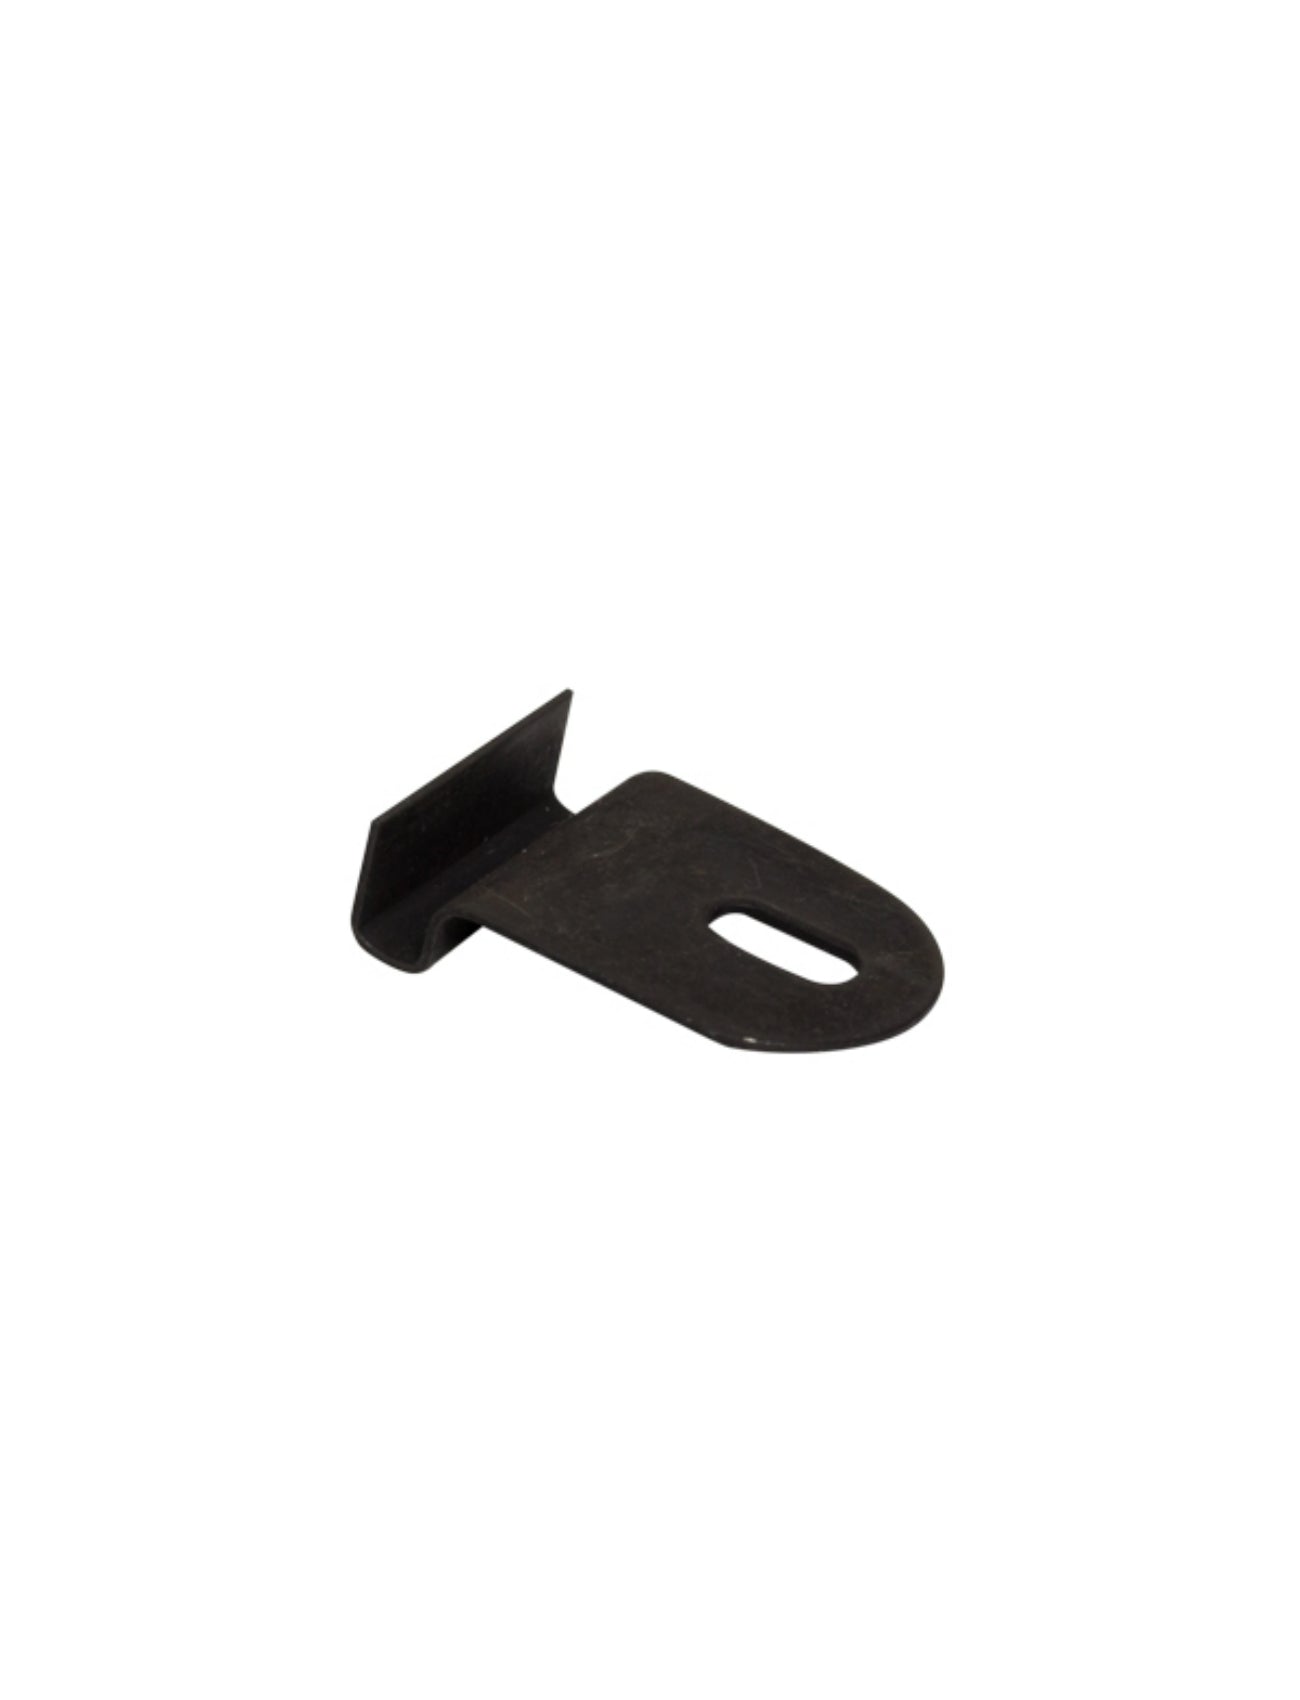 W/SHIELD CLIP PACK OF 10 - KWSC03